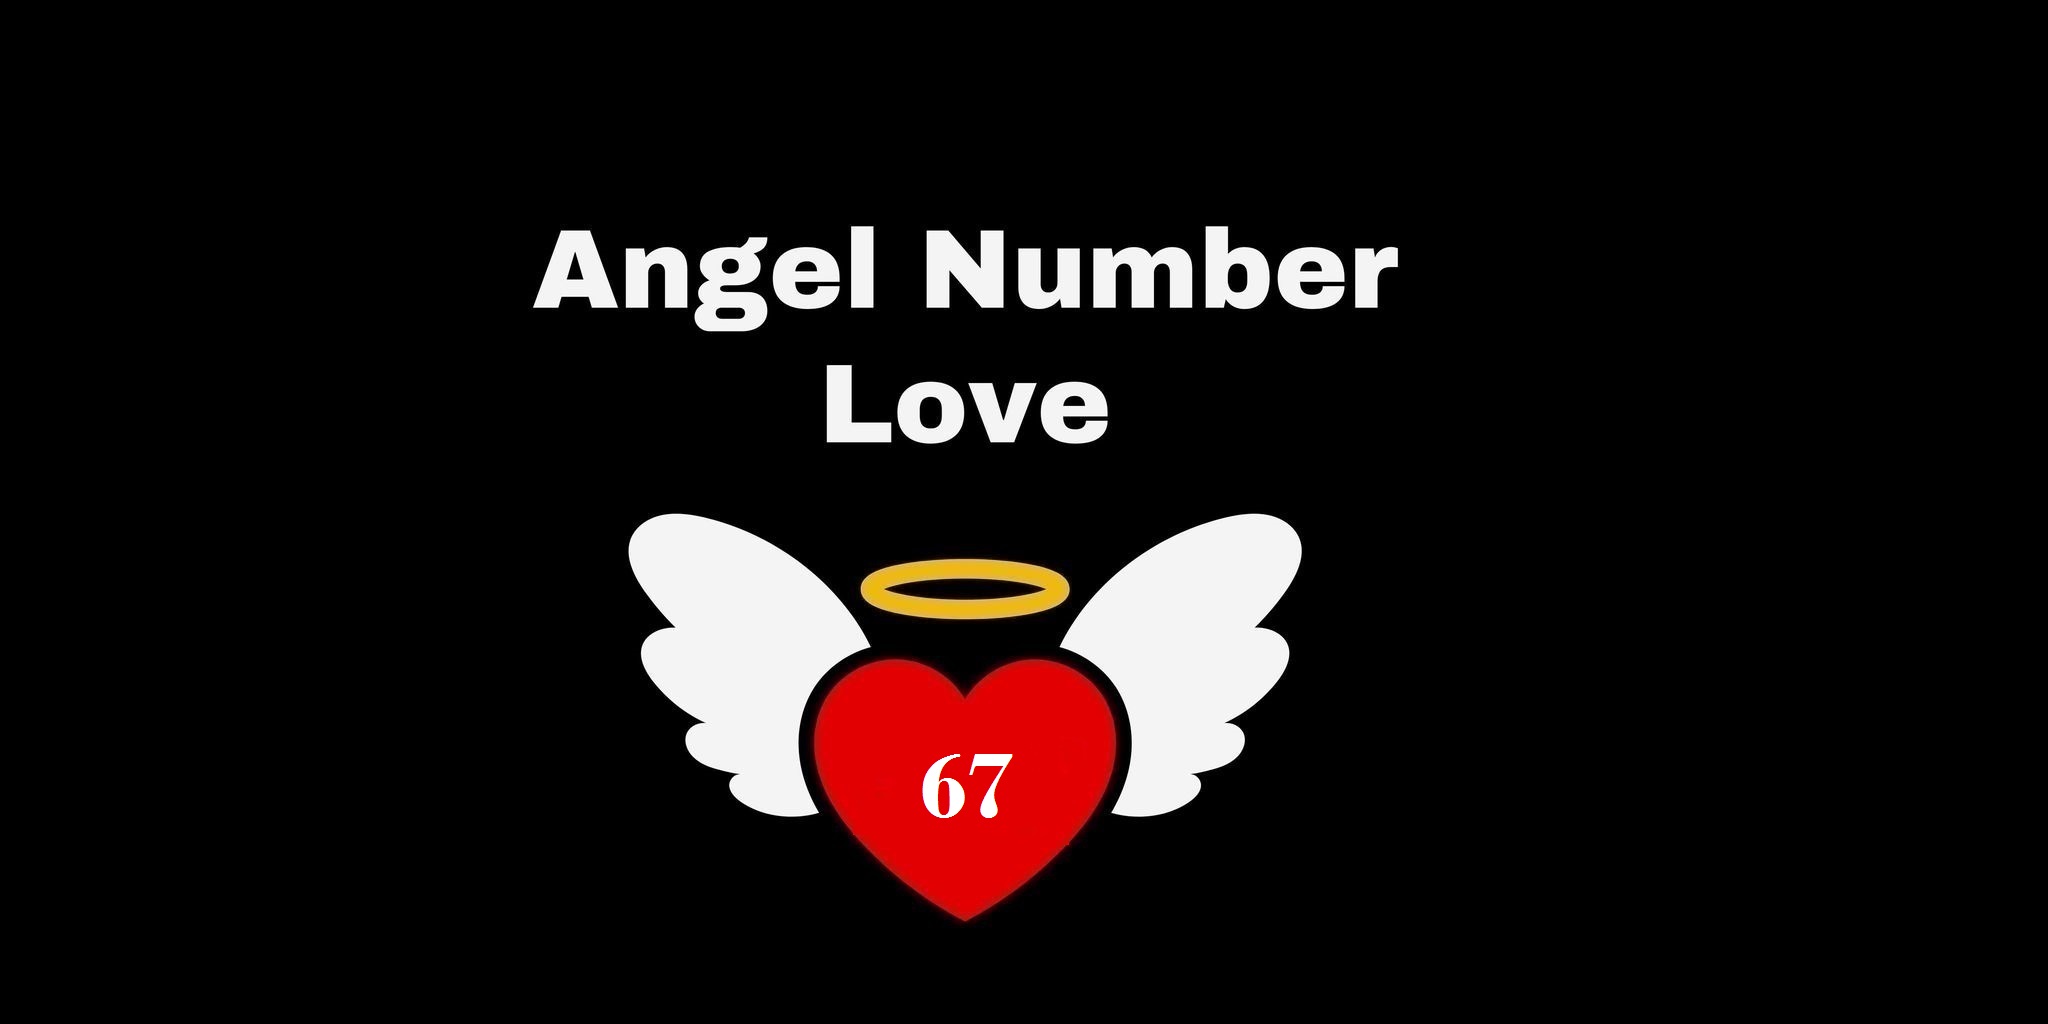 67 Angel Number Meaning In Love